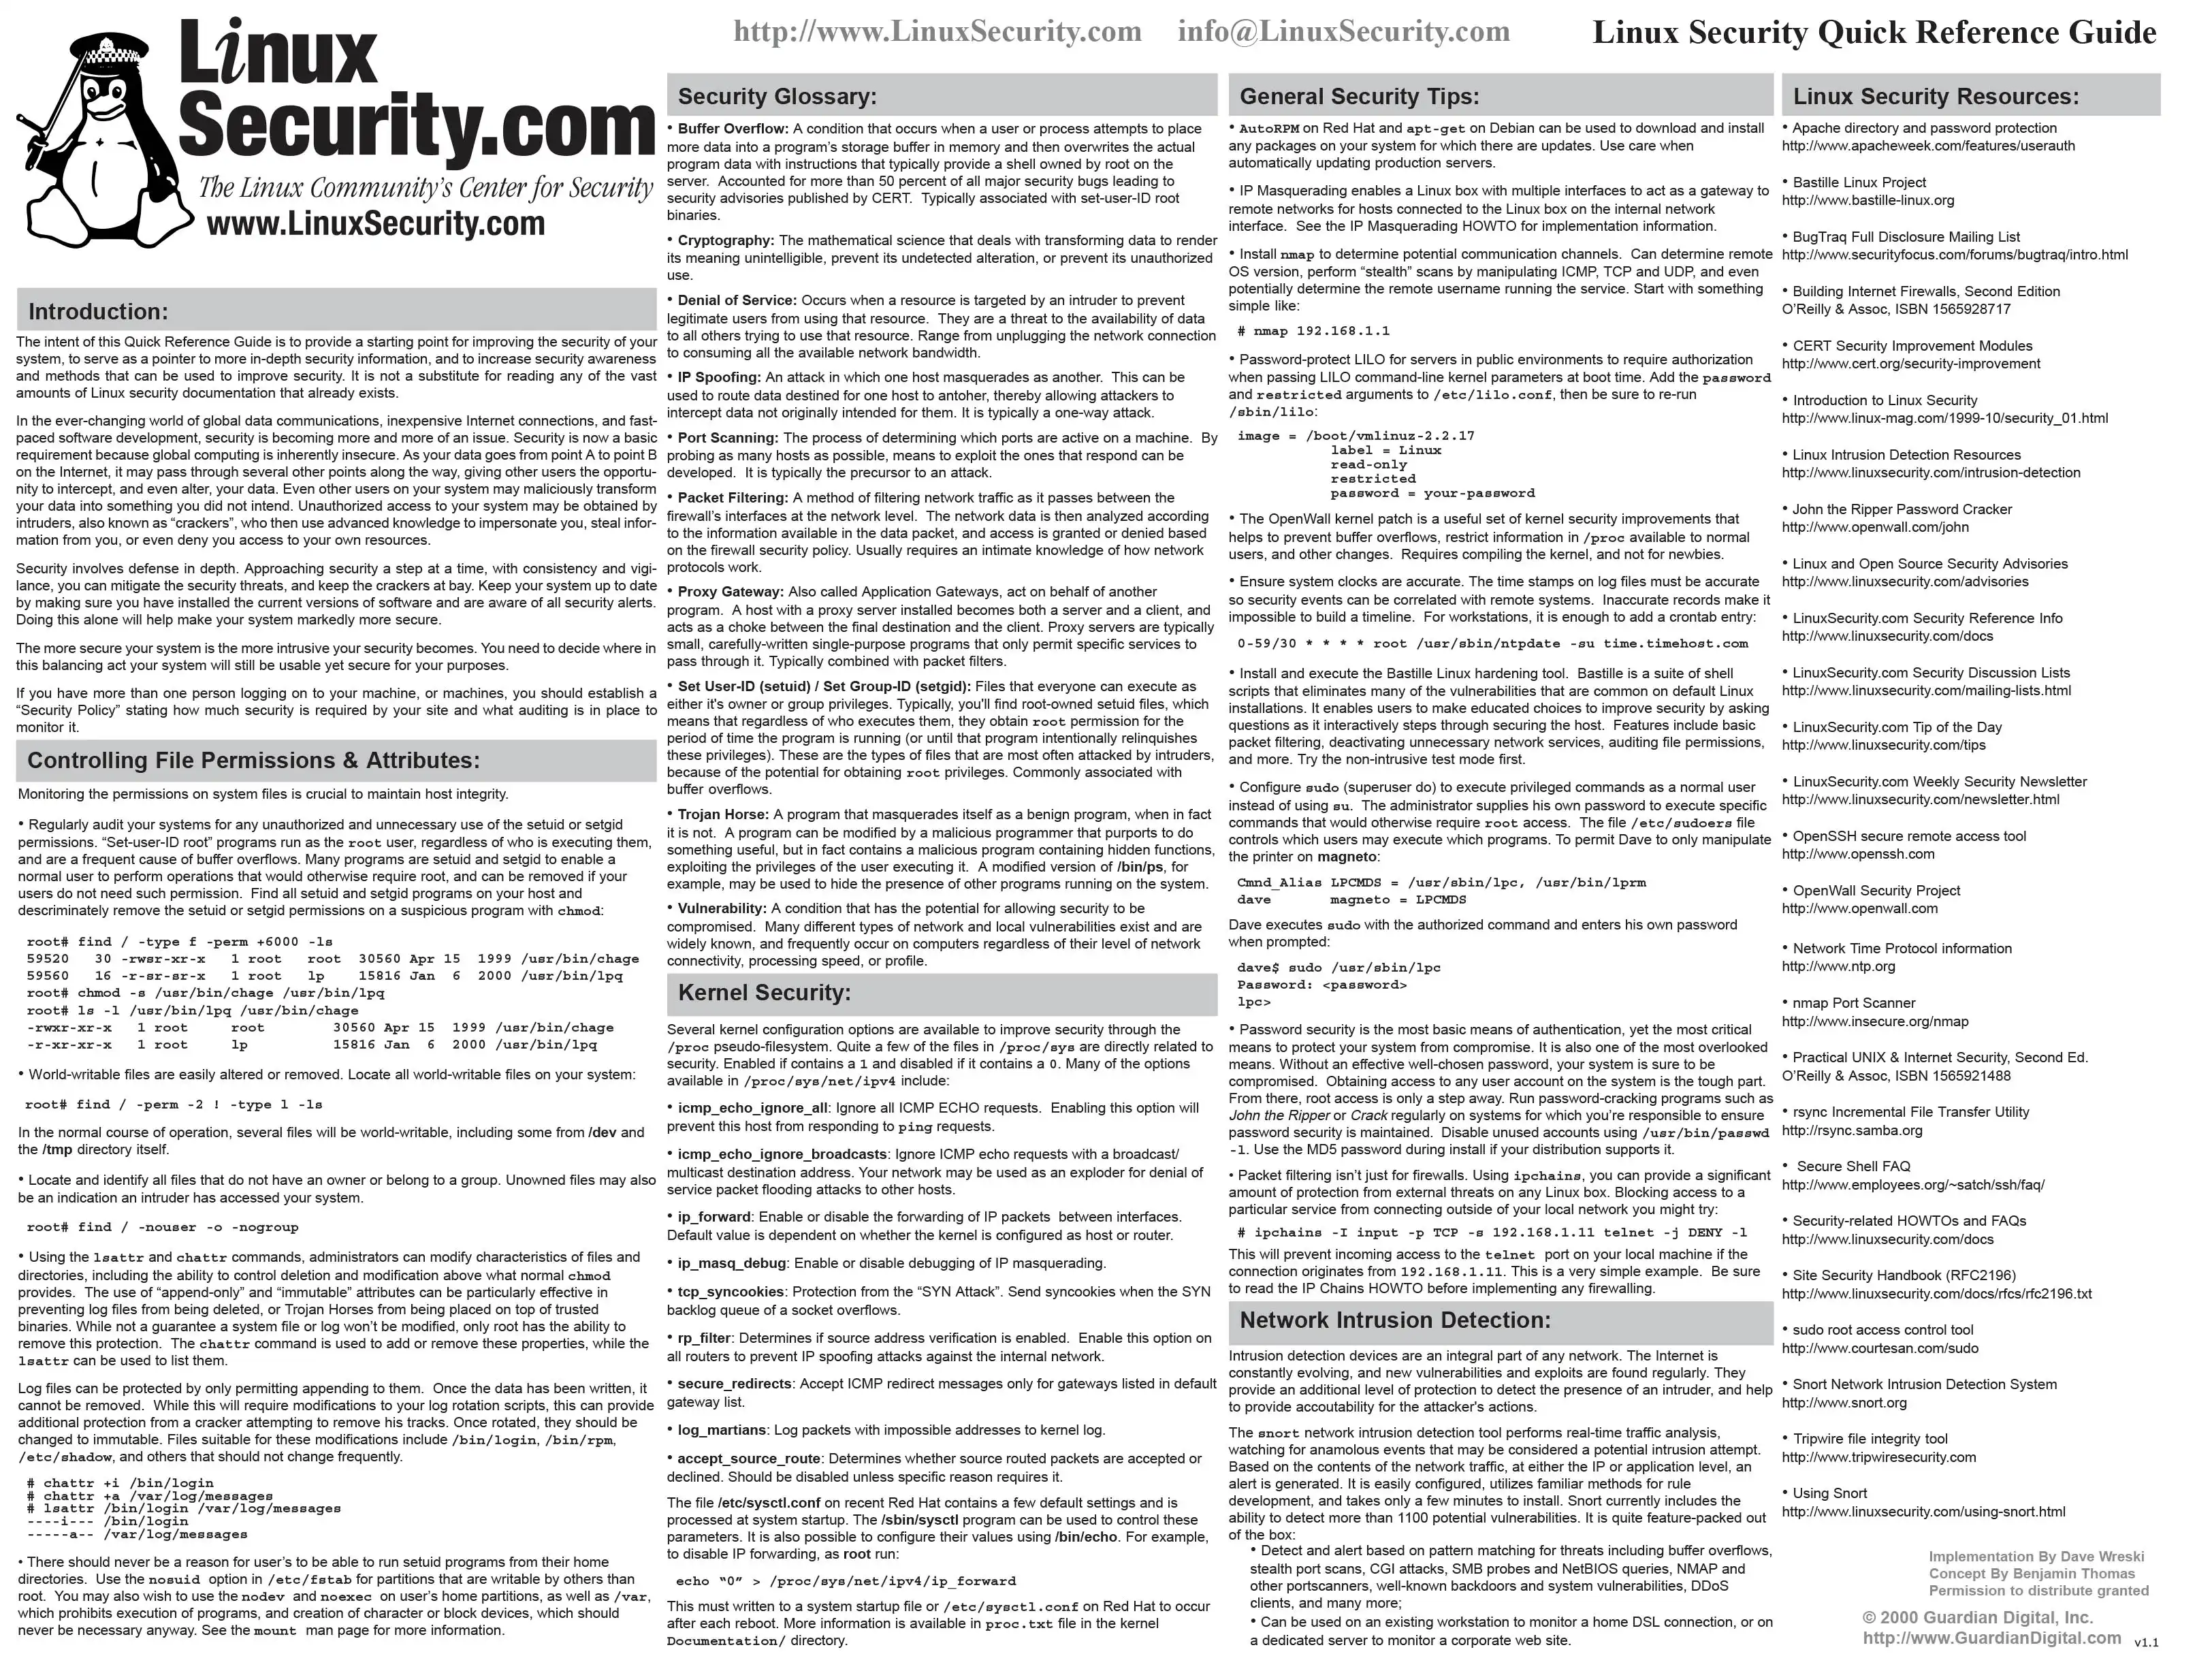 Linux Security Quick Reference Guide 1